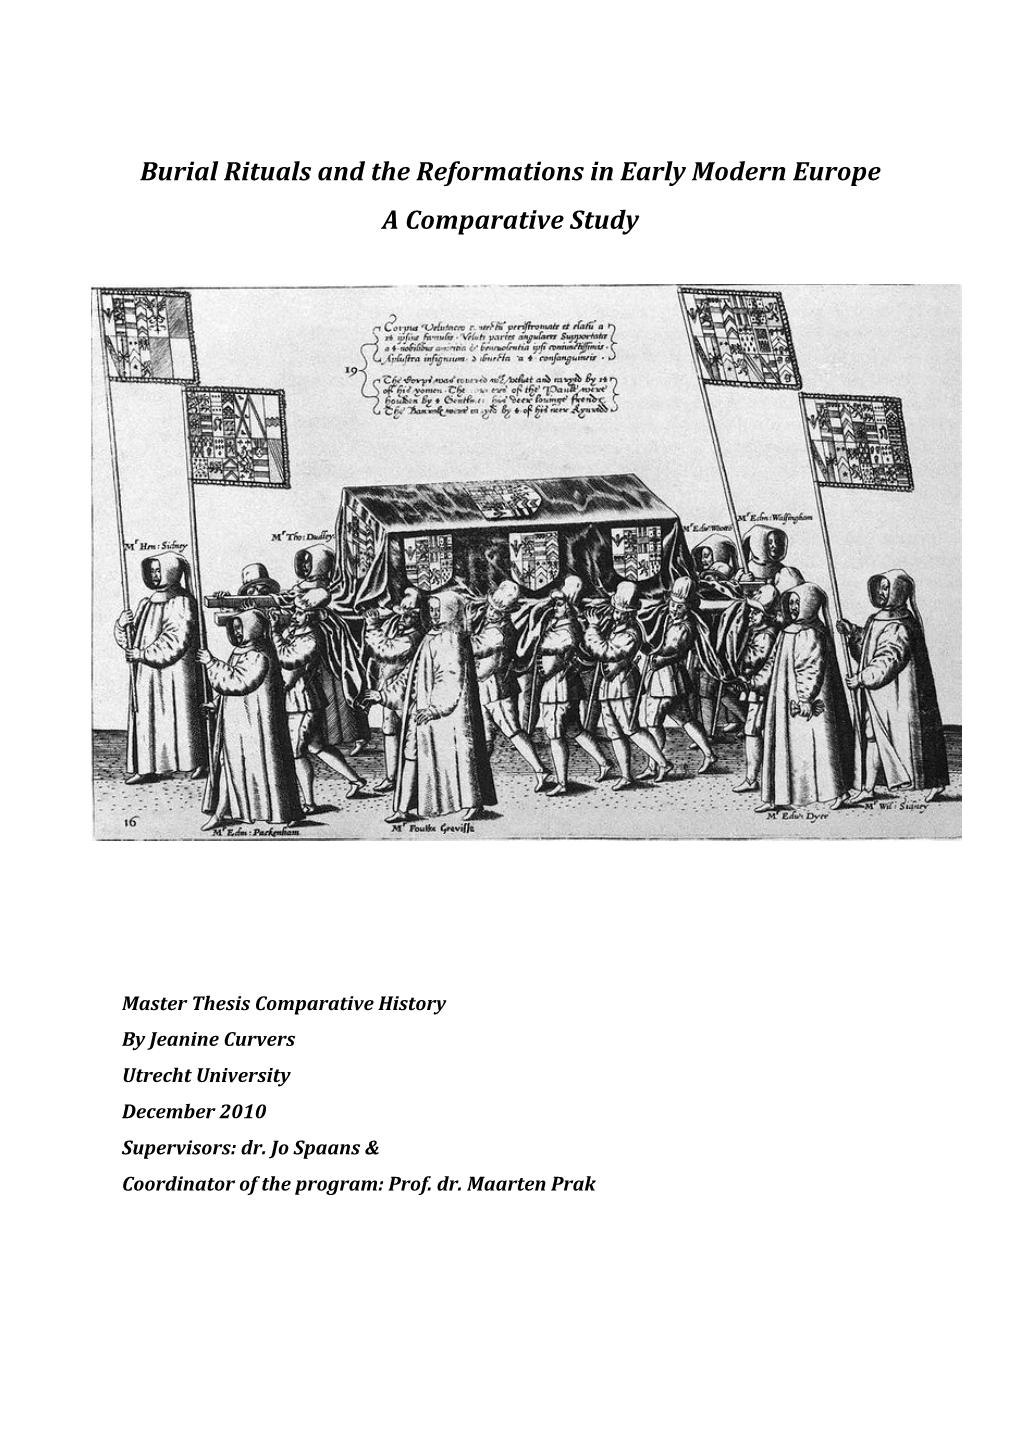 Burial Rituals and the Reformations in Early Modern Europe a Comparative Study